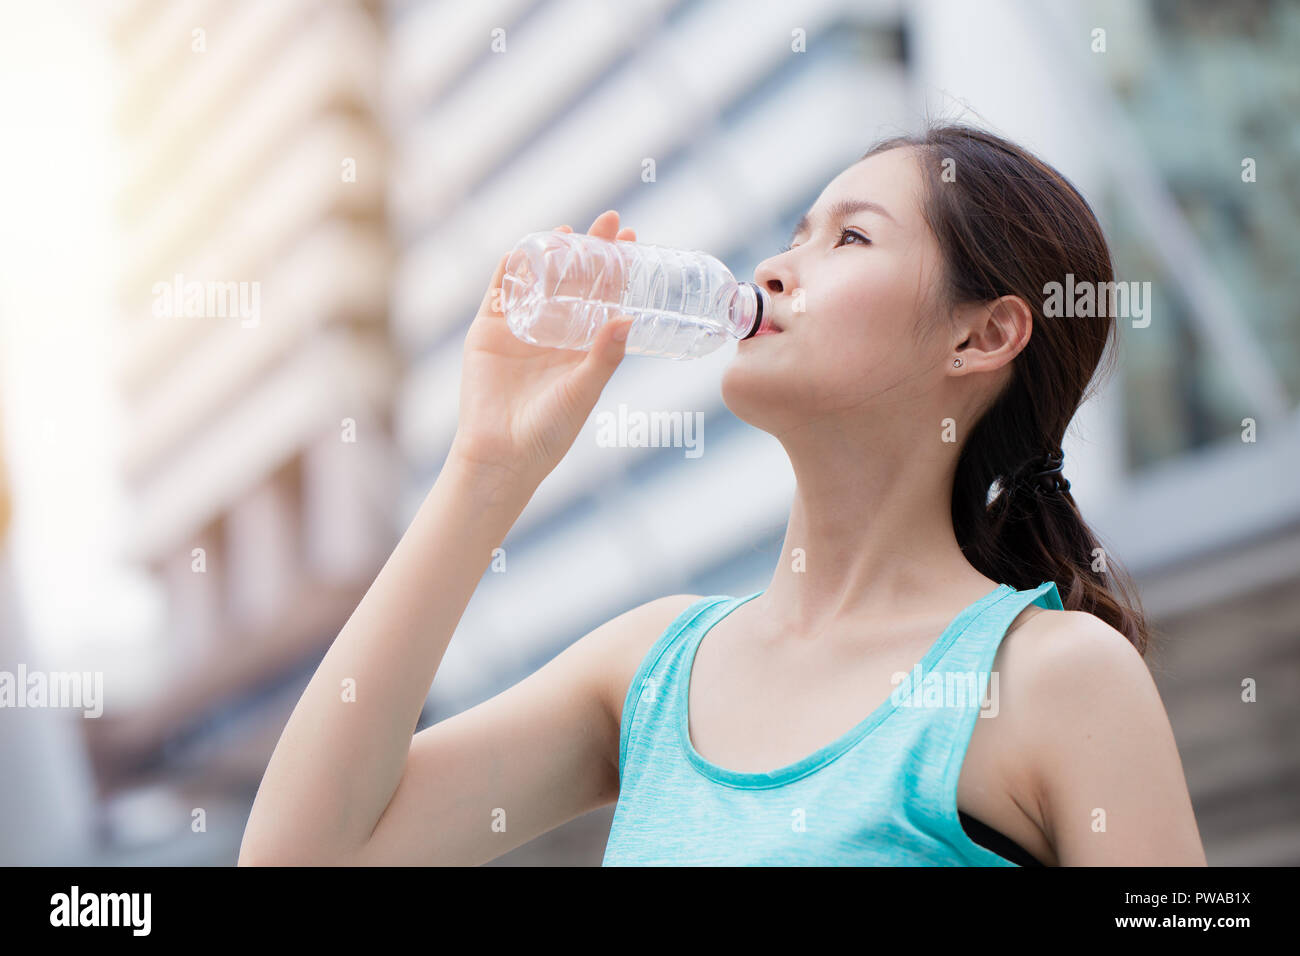 healthy sport cute asian teen drinking water city background Stock Photo